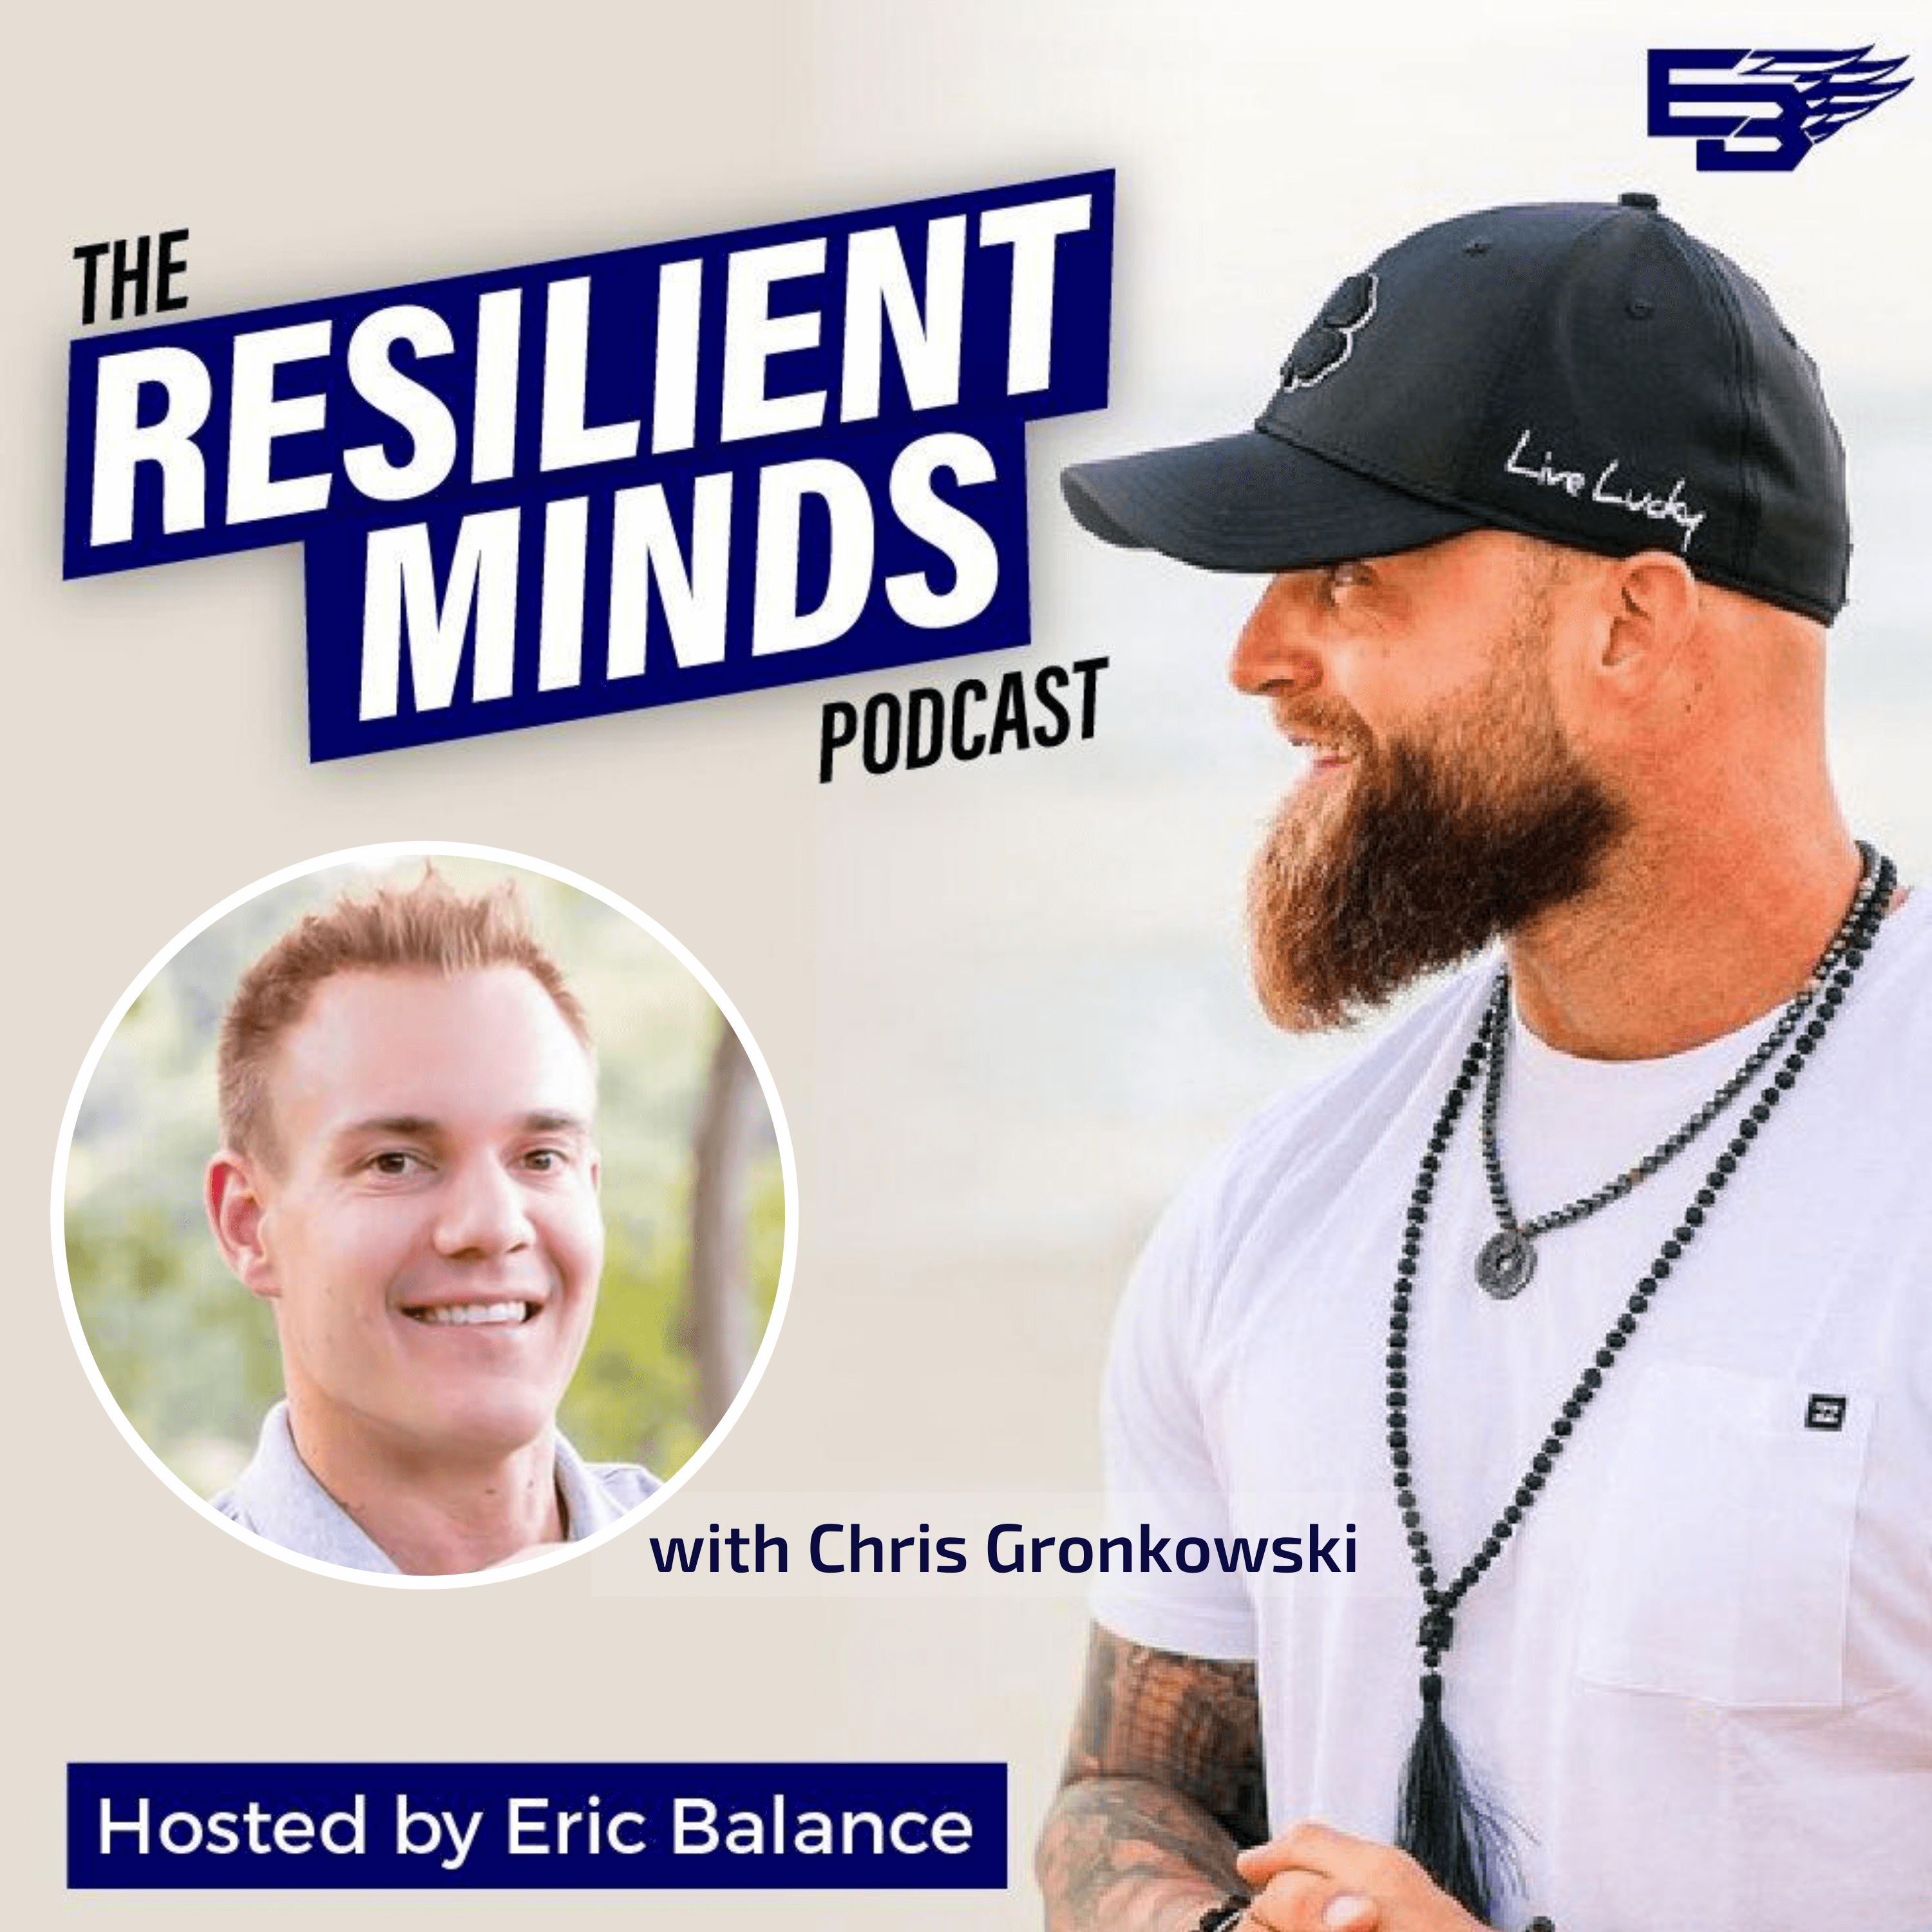 Episode 44 – How to Build a Business Around Your Passion with Chris Gronkowski.